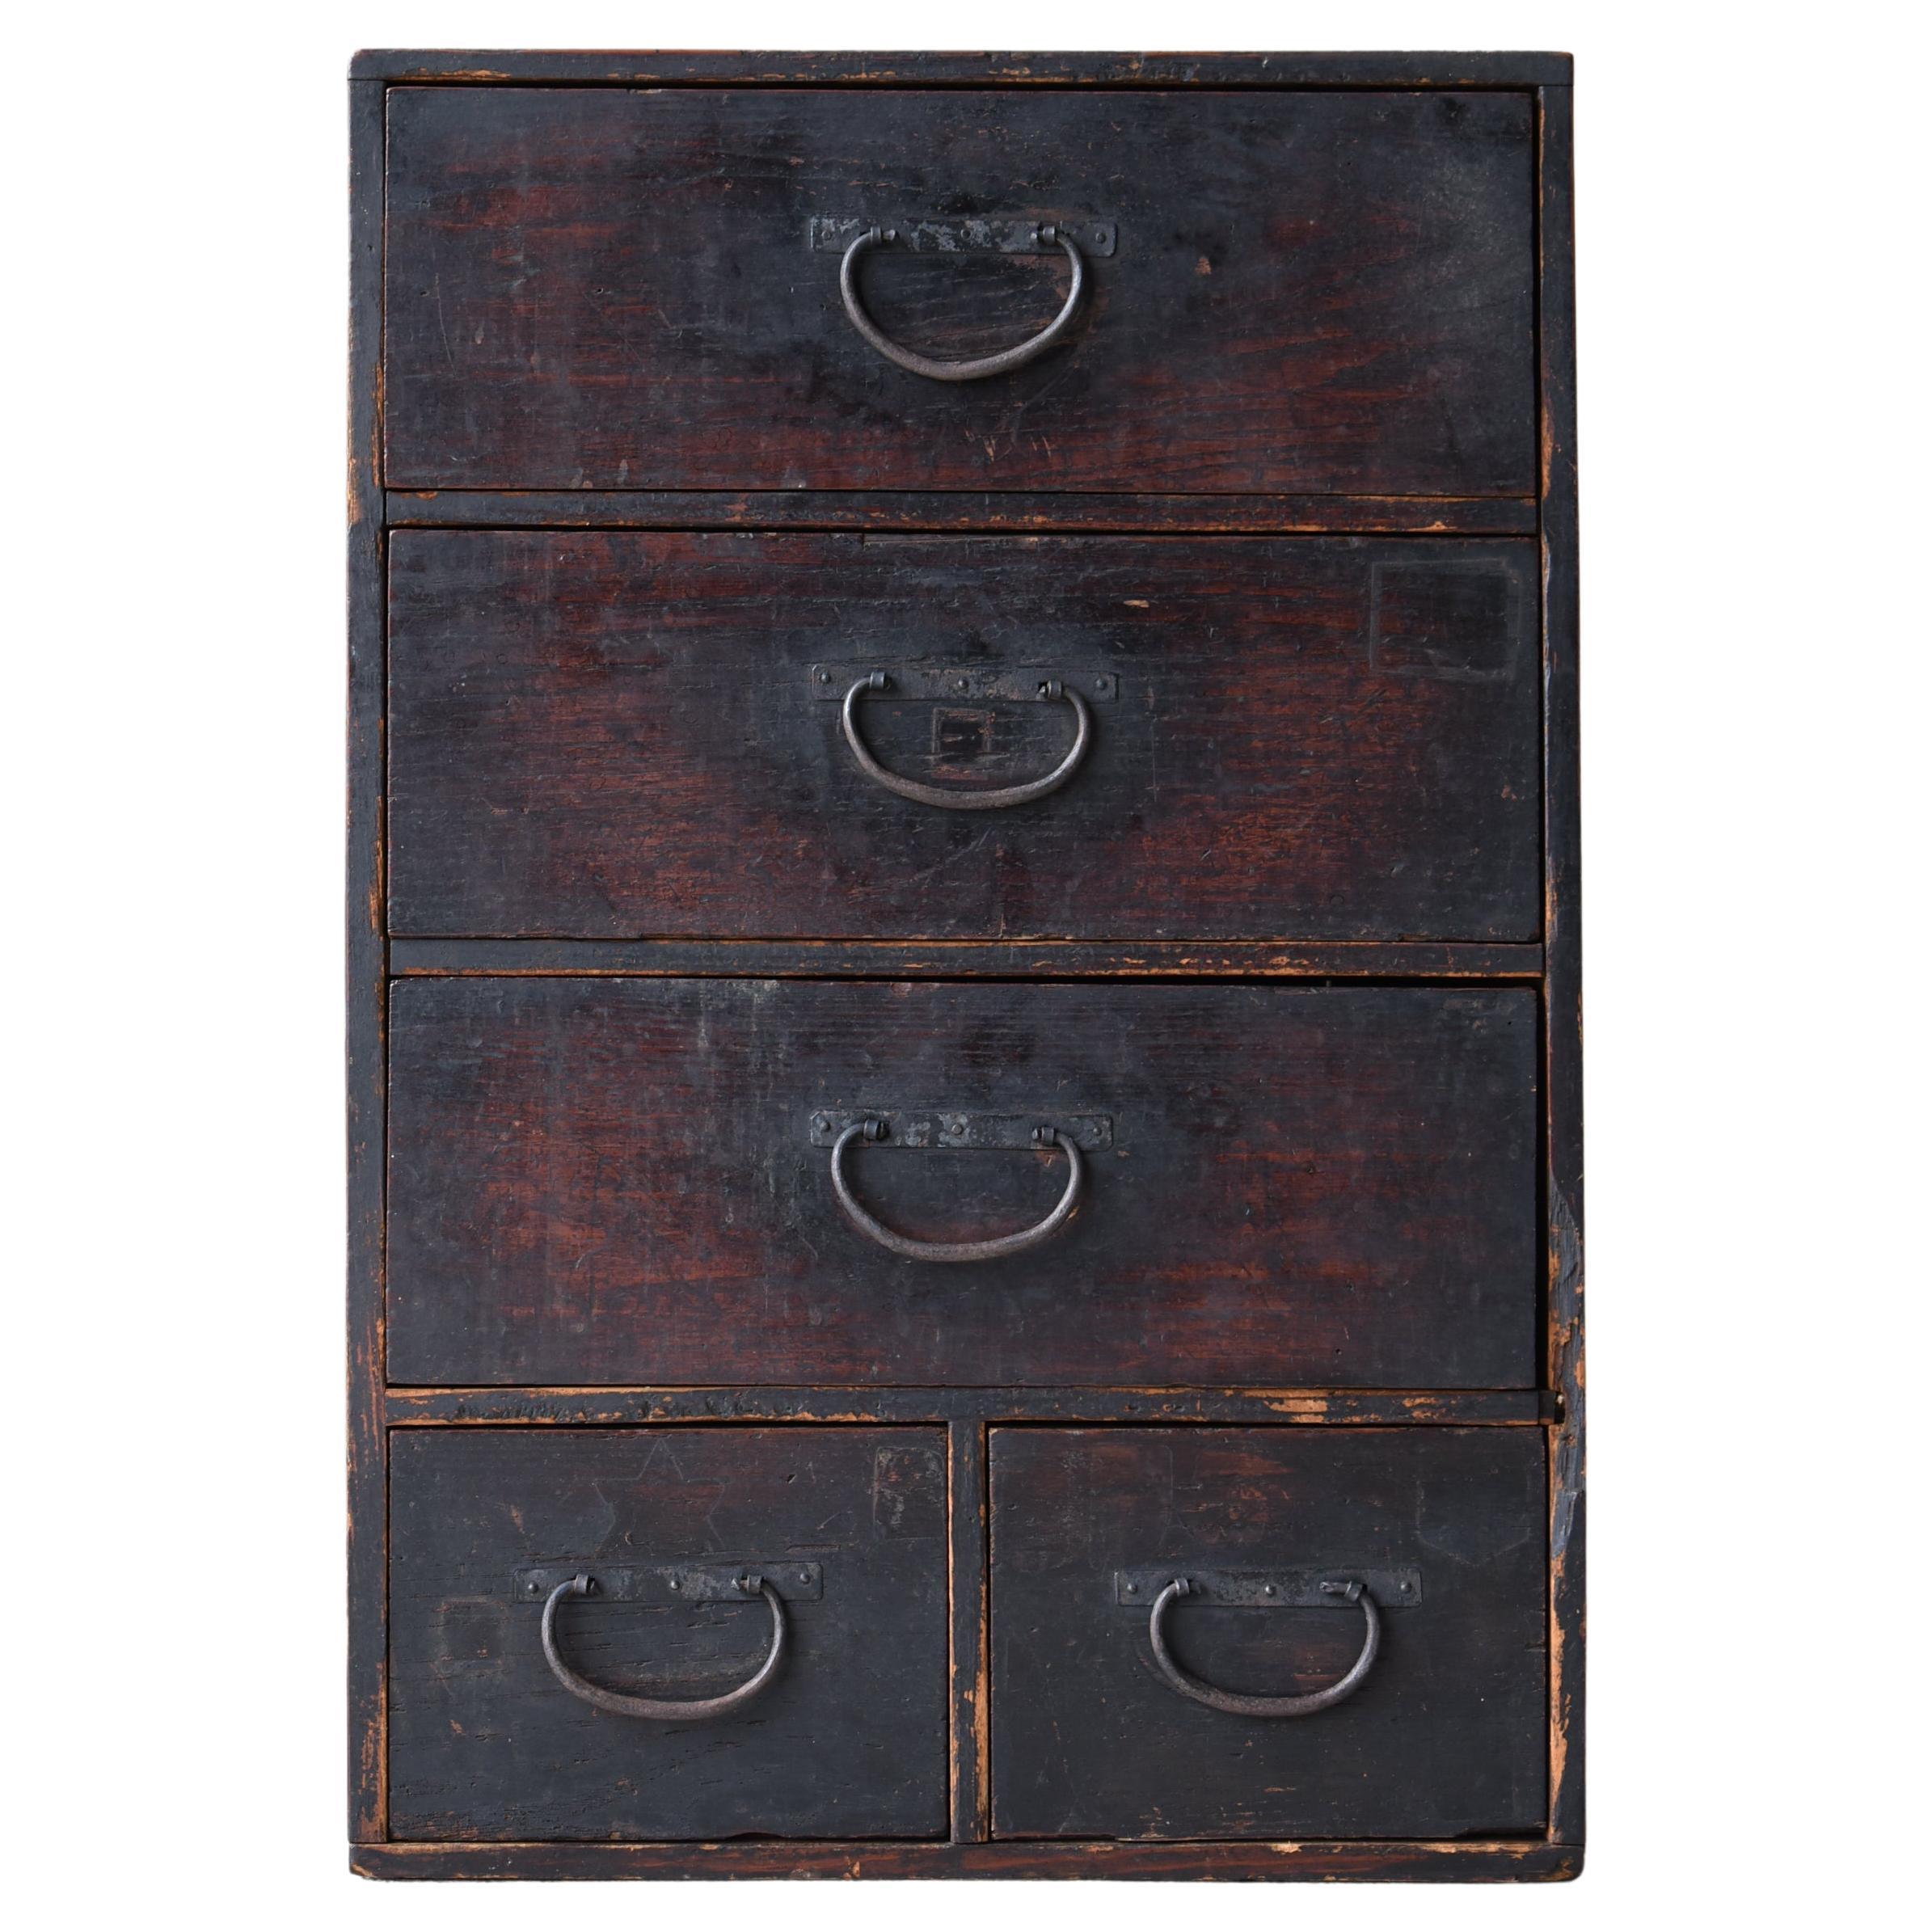 Japanese Antique Chests of Drawers 1860s-1900s /Tansu Storage Mingei Cabinet